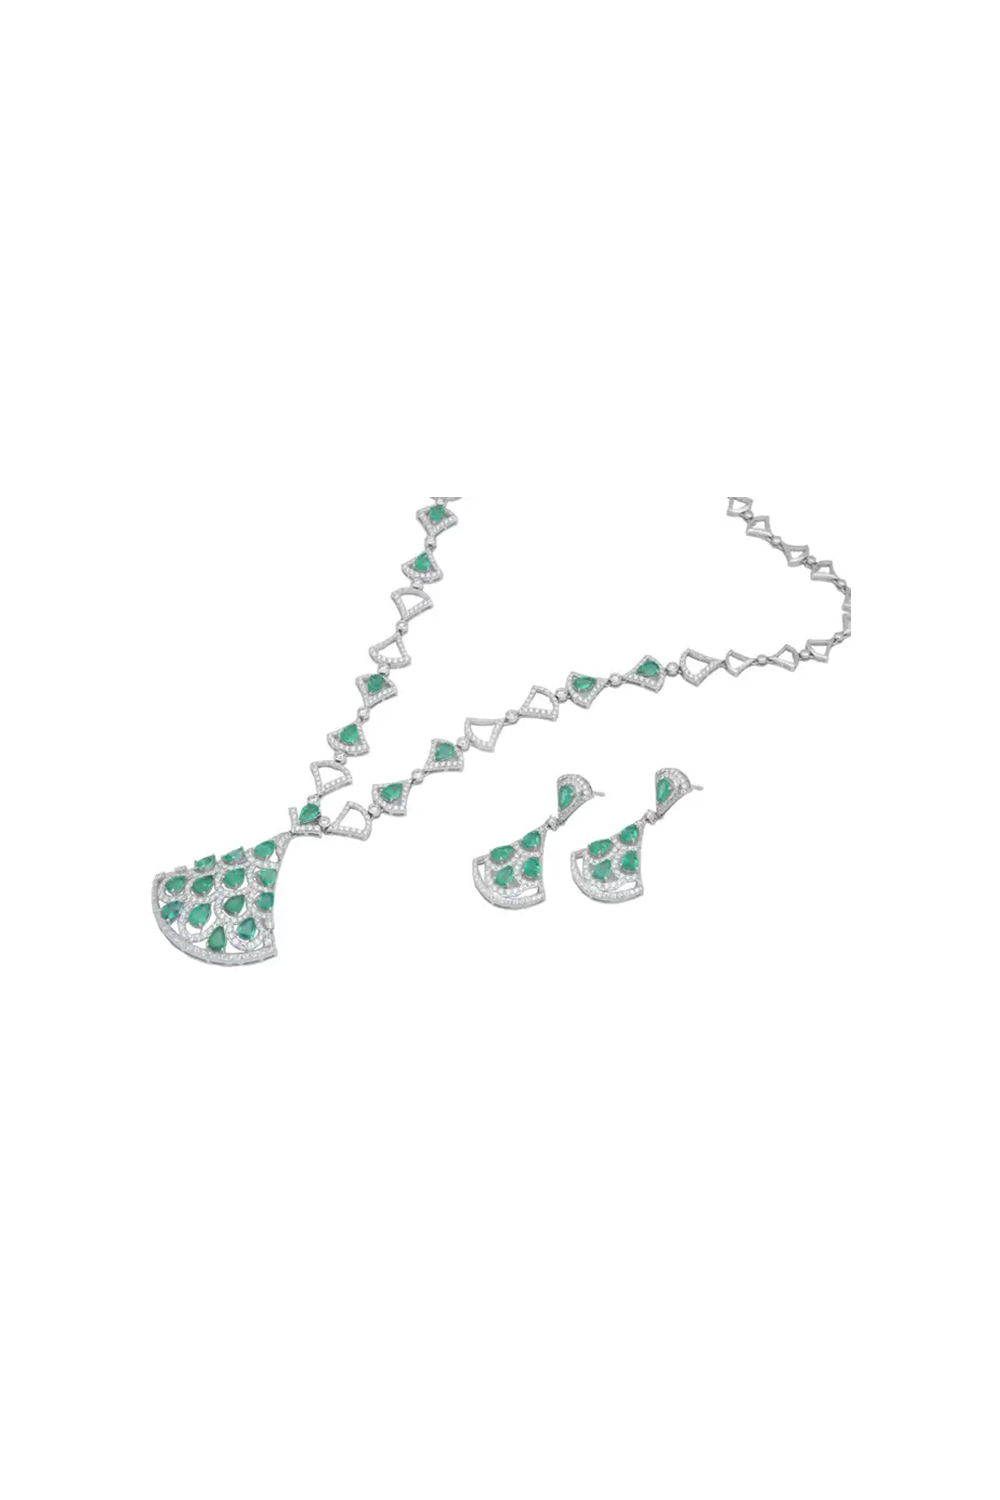 Natural Diamond 7.98 Carats and Emerald 10.54 Carats Necklace in 14k Gold